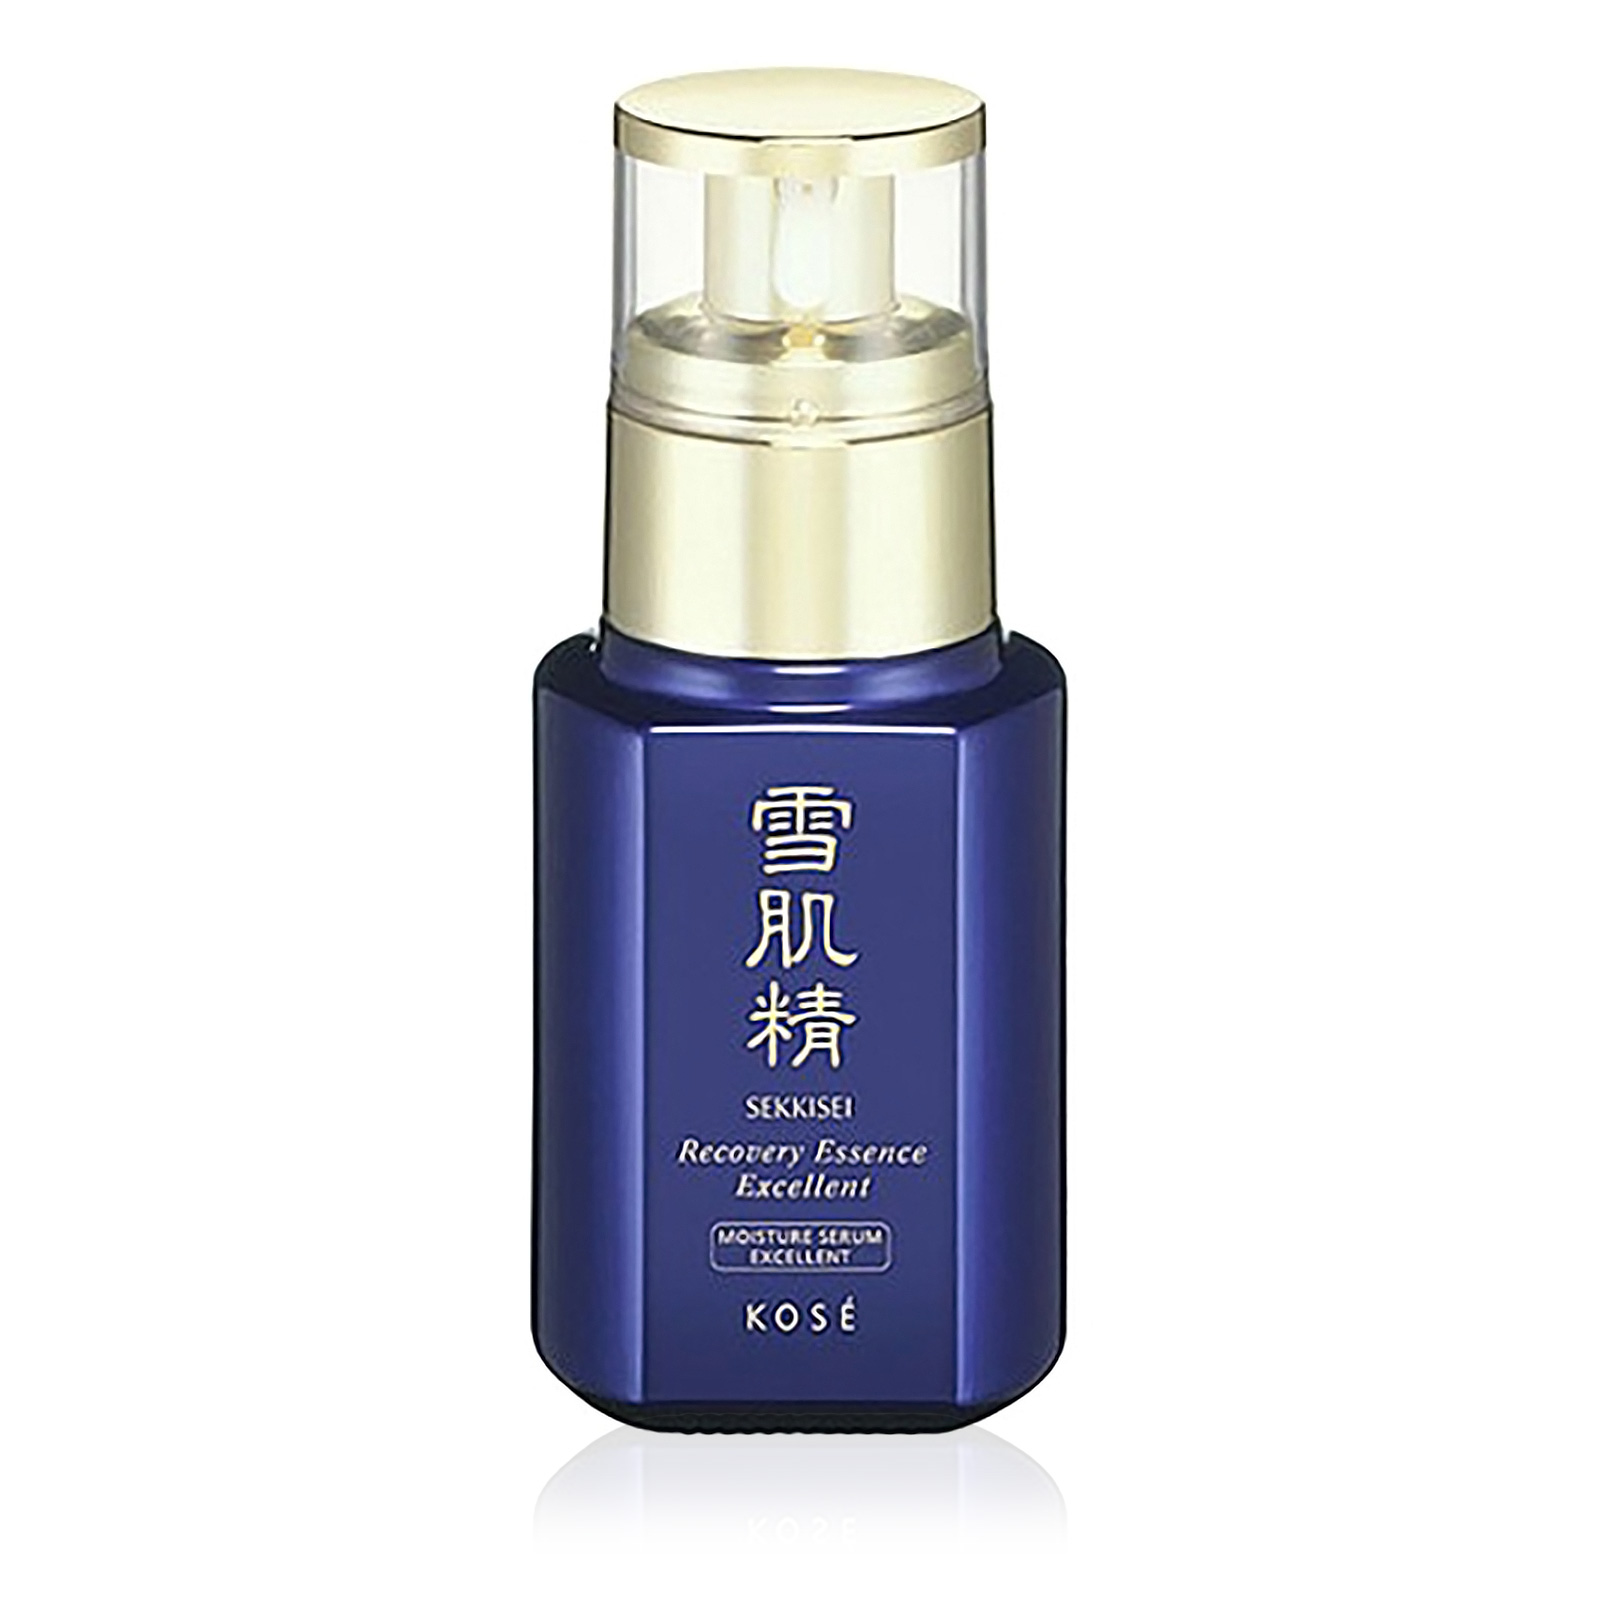 Medicated Sekkisei Recovery Essence Excellent